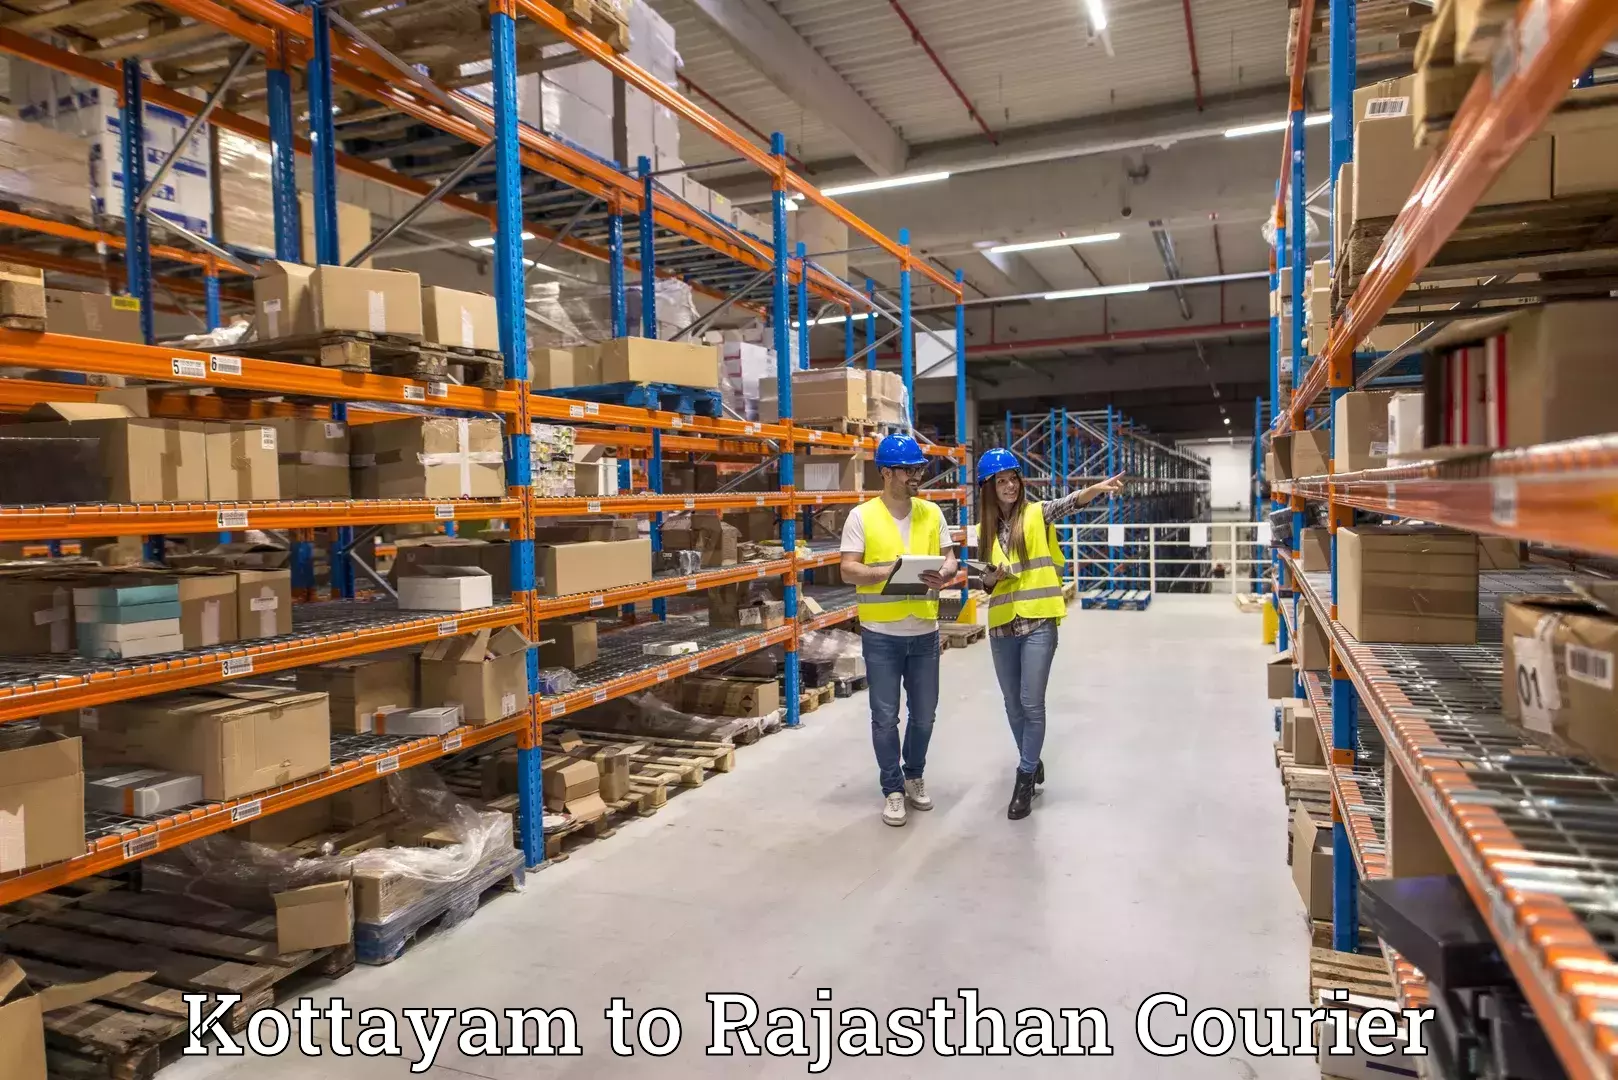 High-priority parcel service Kottayam to Anupgarh